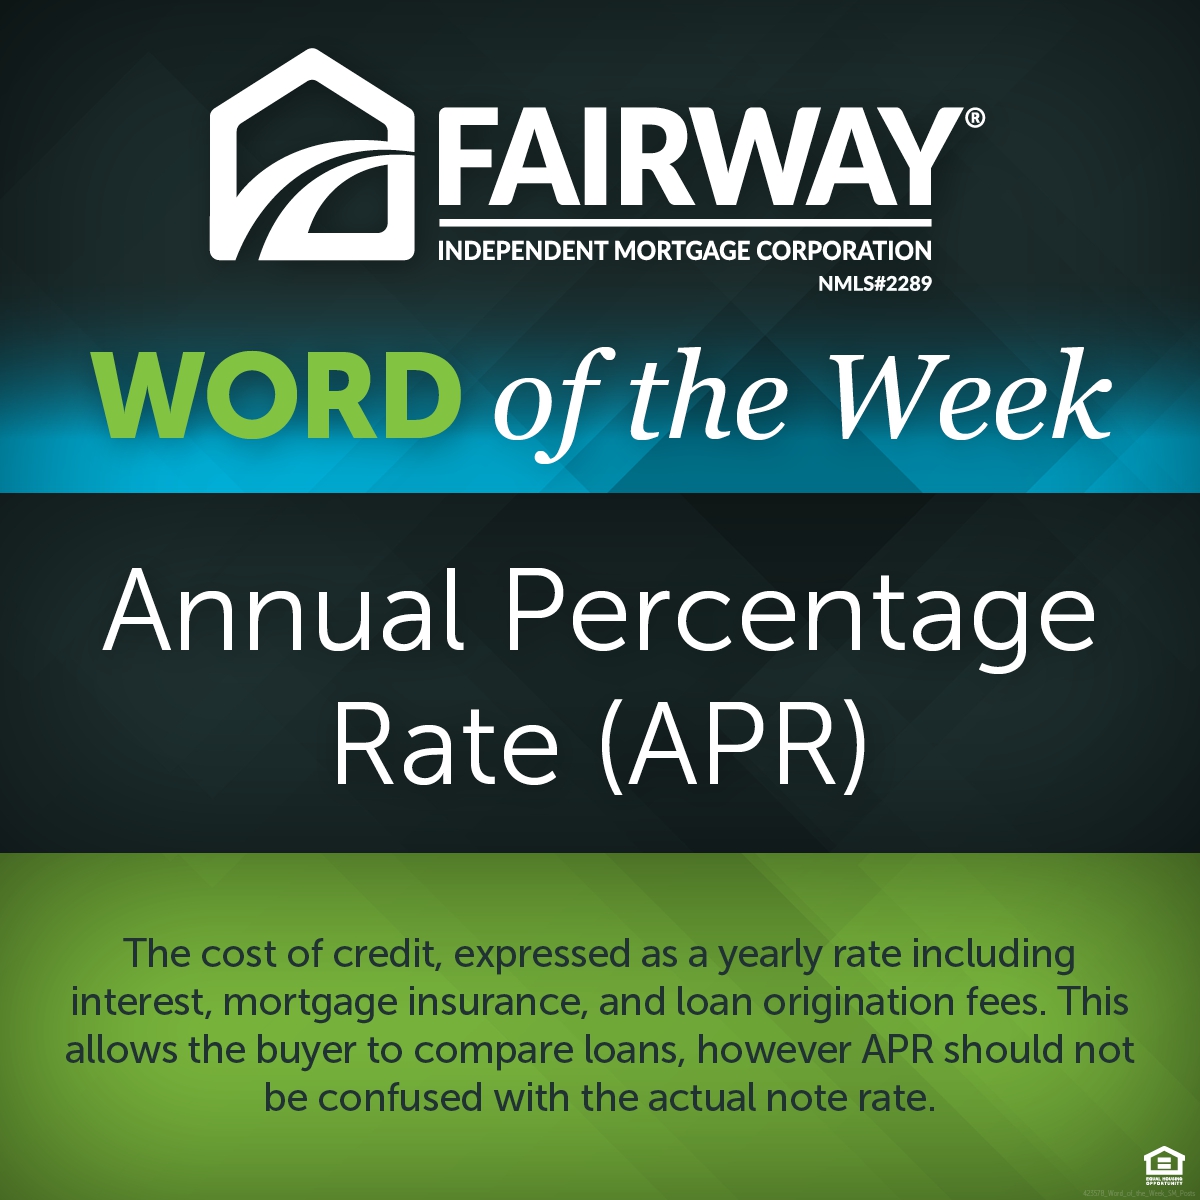 It is important to know what mortgage terms mean. Read the above to learn what an APR is. #MortgageTerms #HomeMortgage #FairwayIndependentMortgage